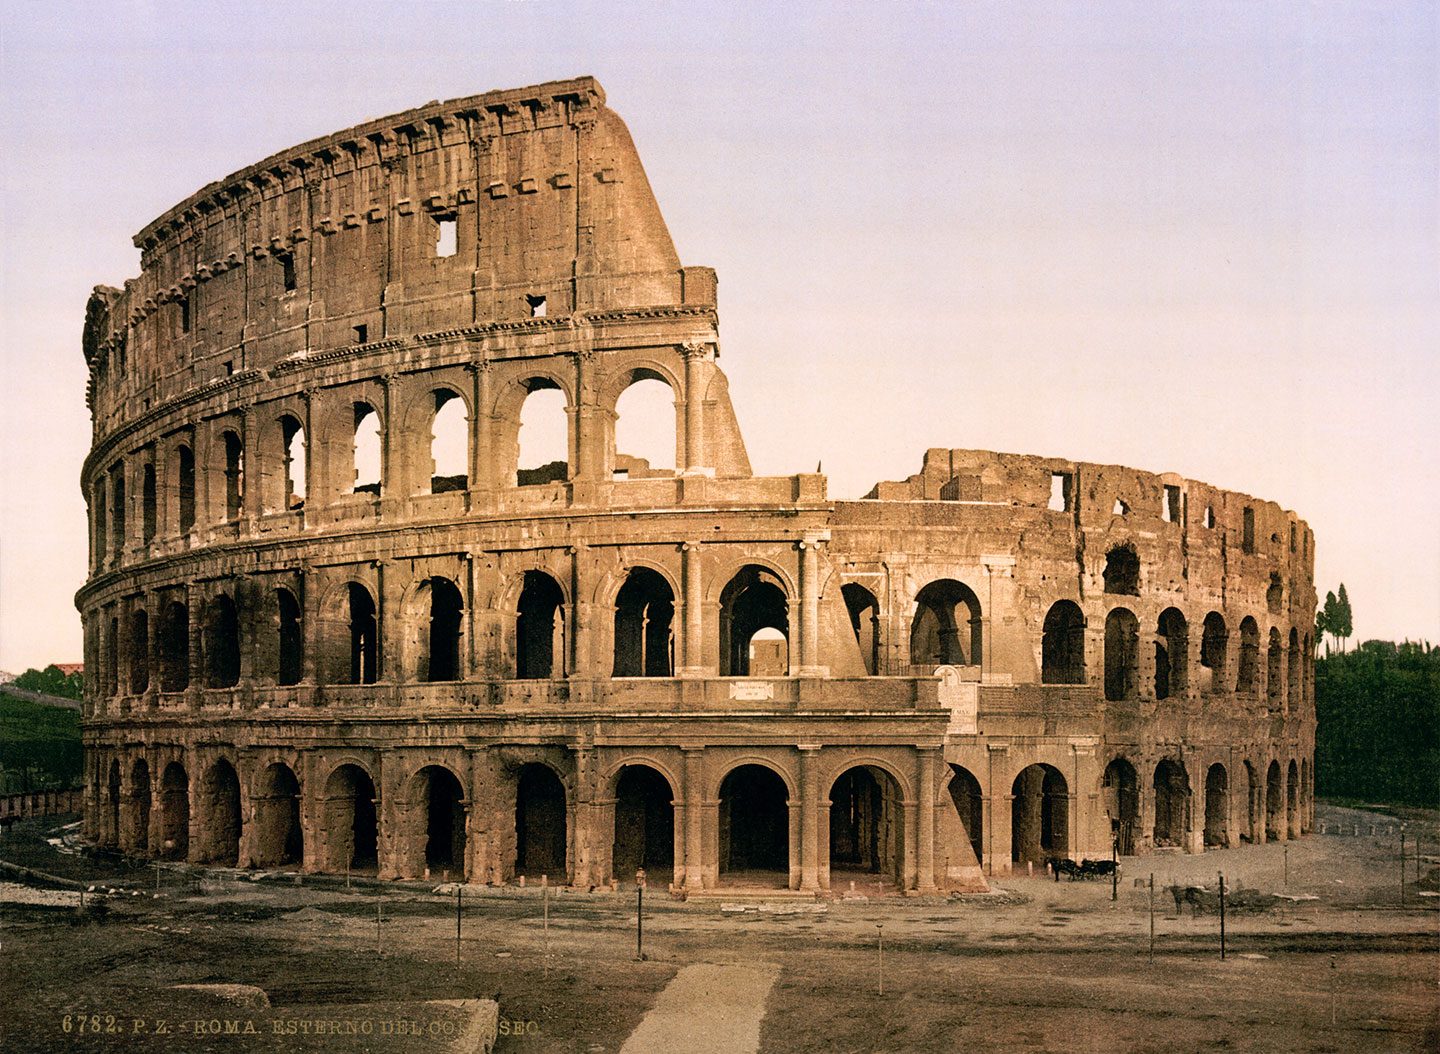 The Colosseum at dusk